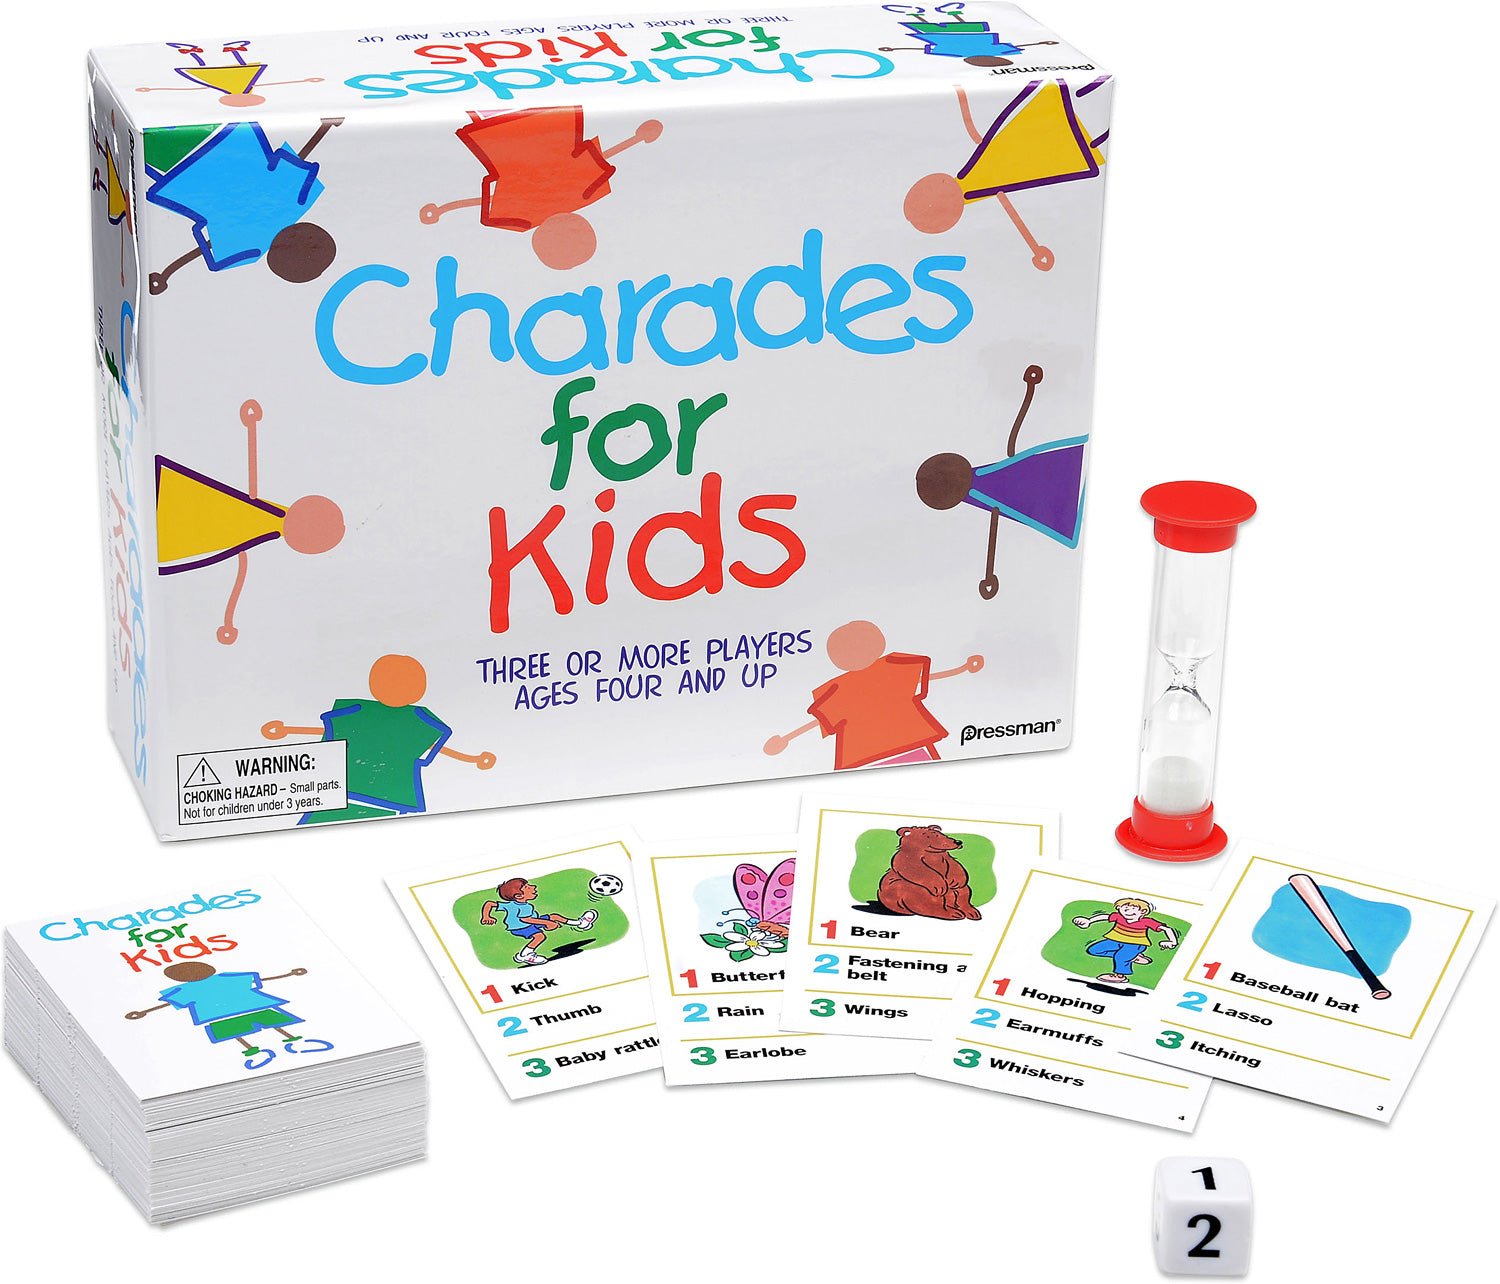 Charades for Kids by Goliath #103009.406